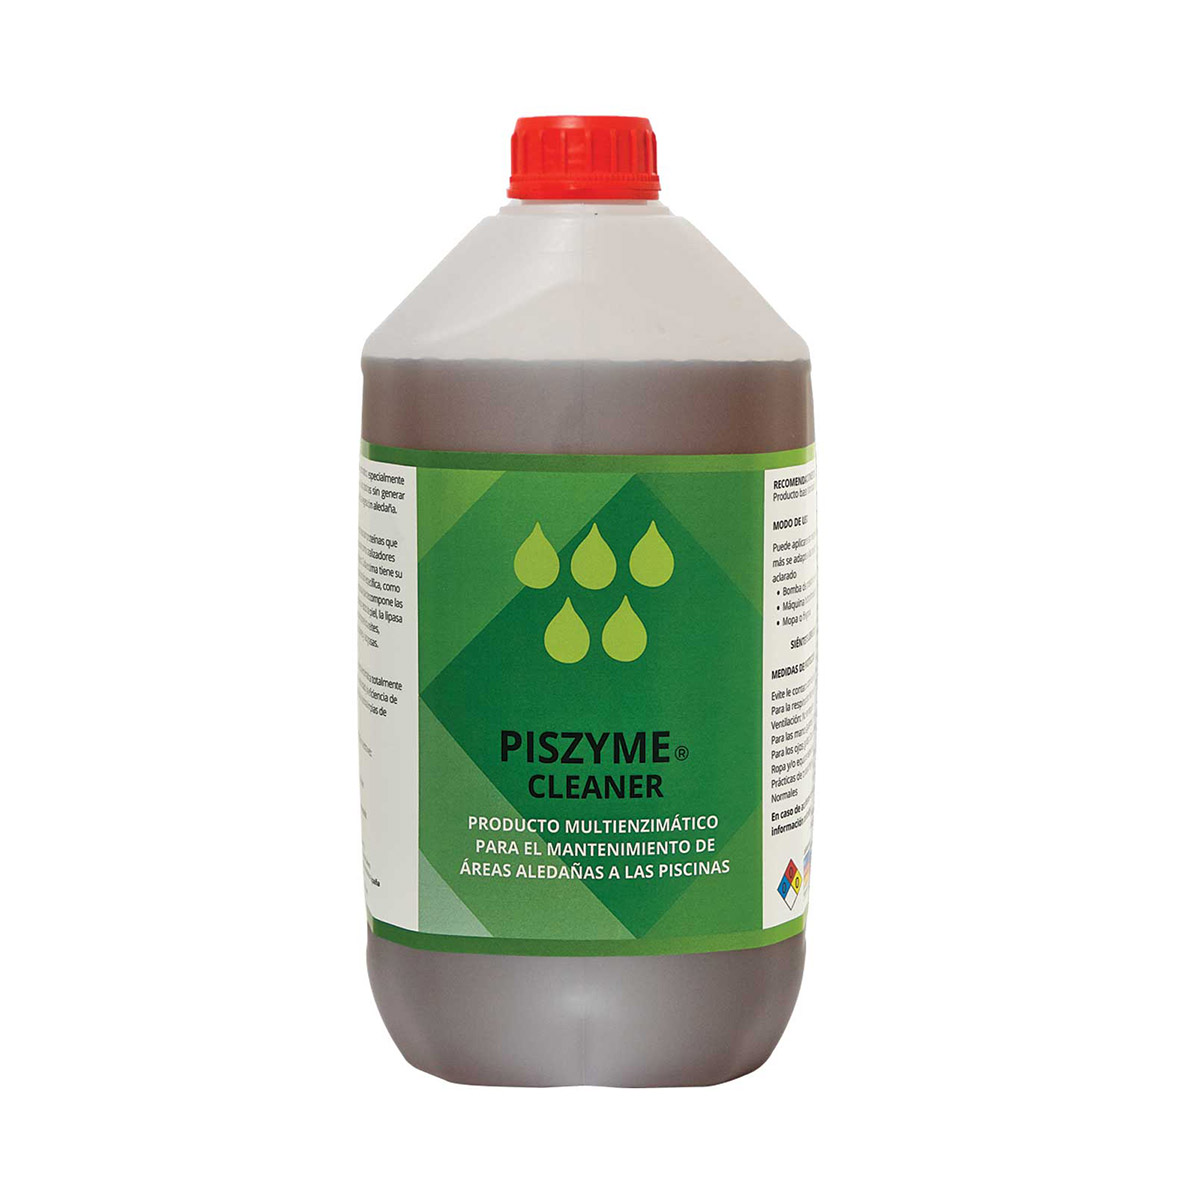 PISZYME® CLEANER